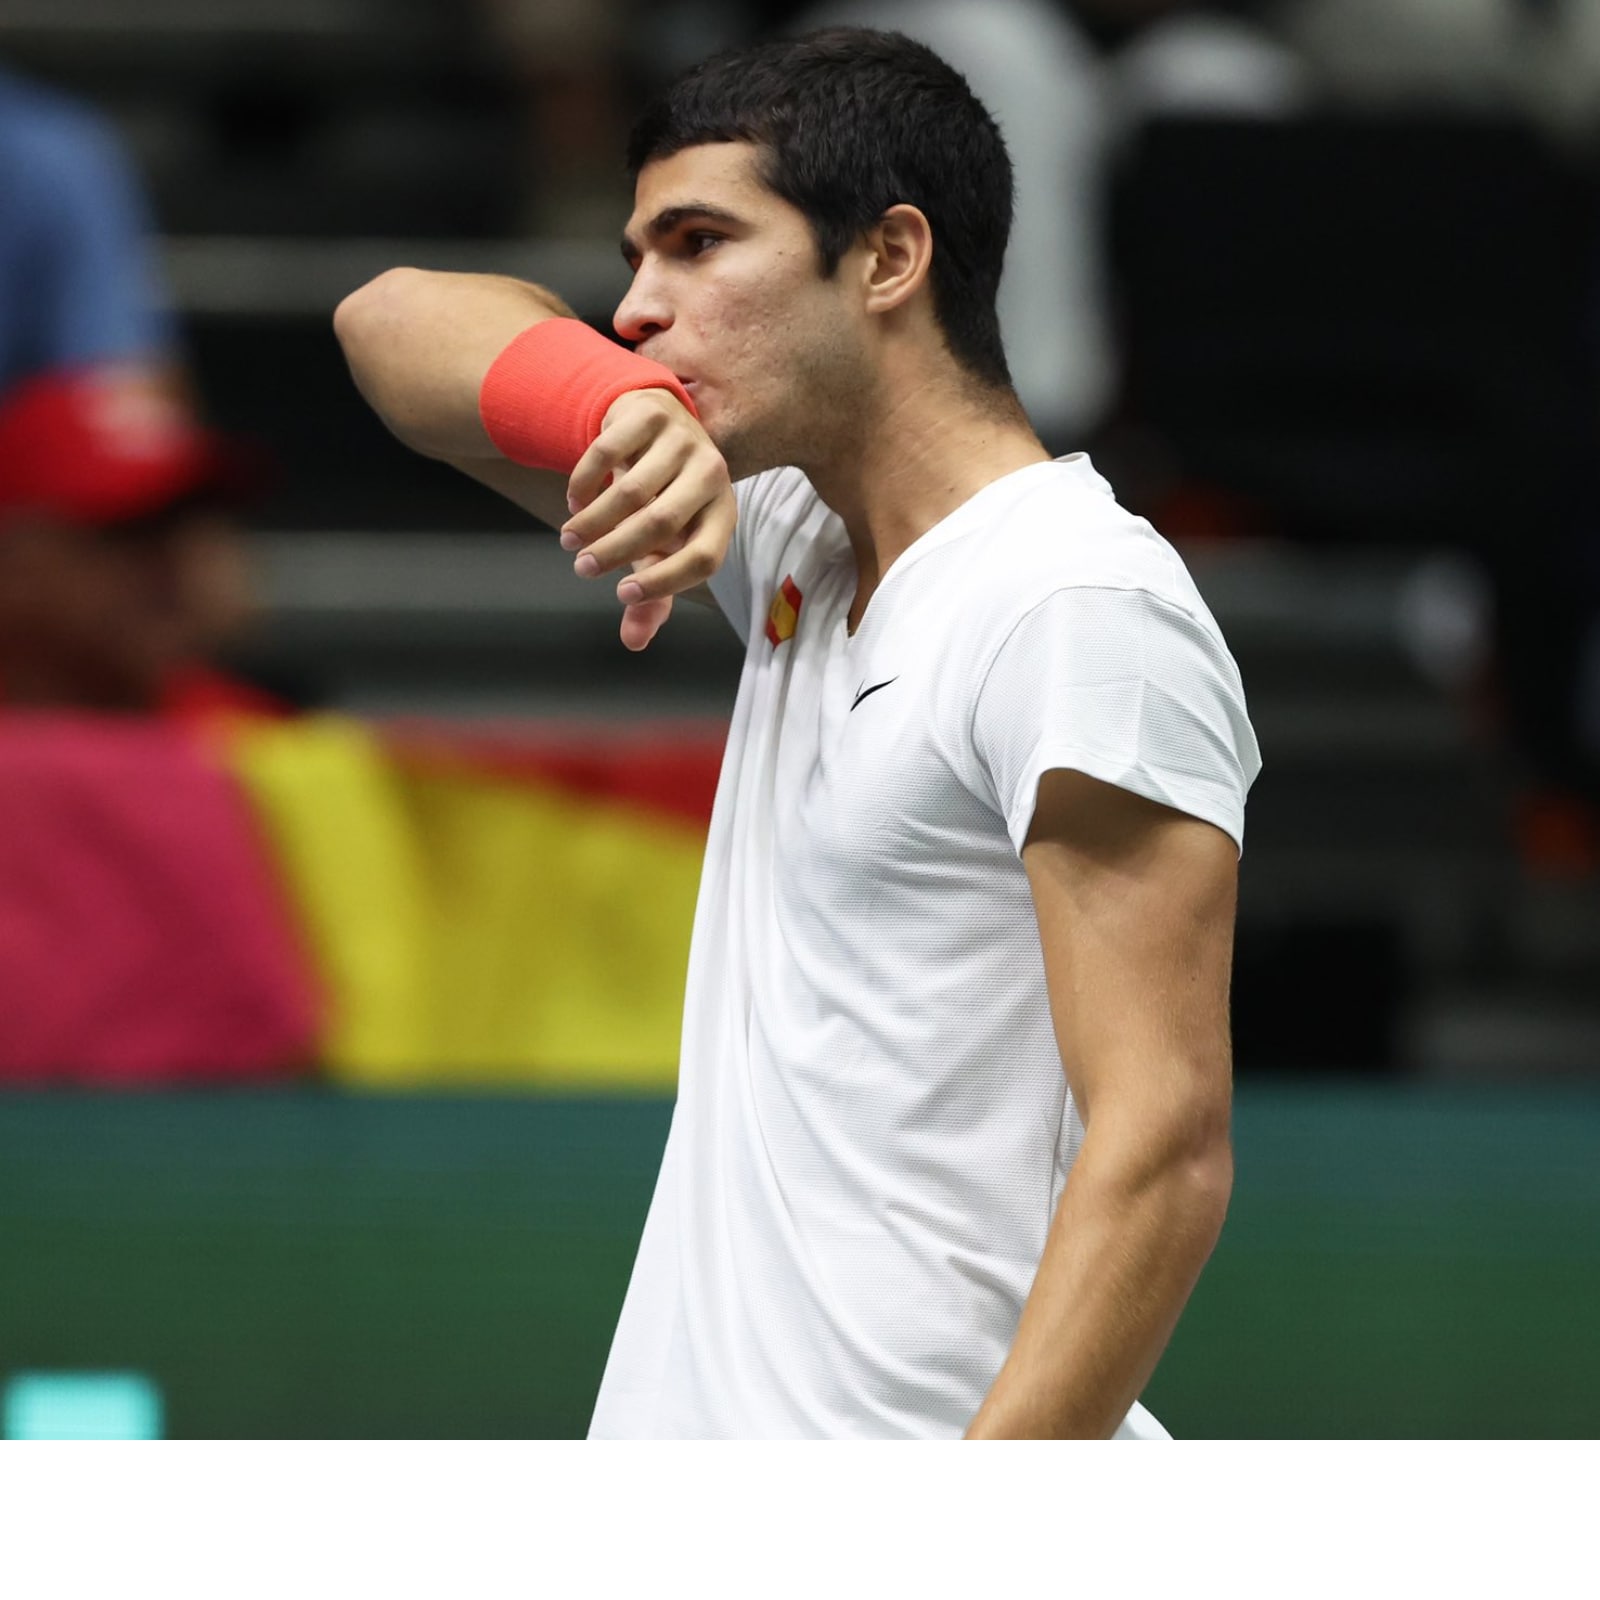 Italy and Germany Advance in Davis Cup, Carlos Alacaraz has Losing Homecoming